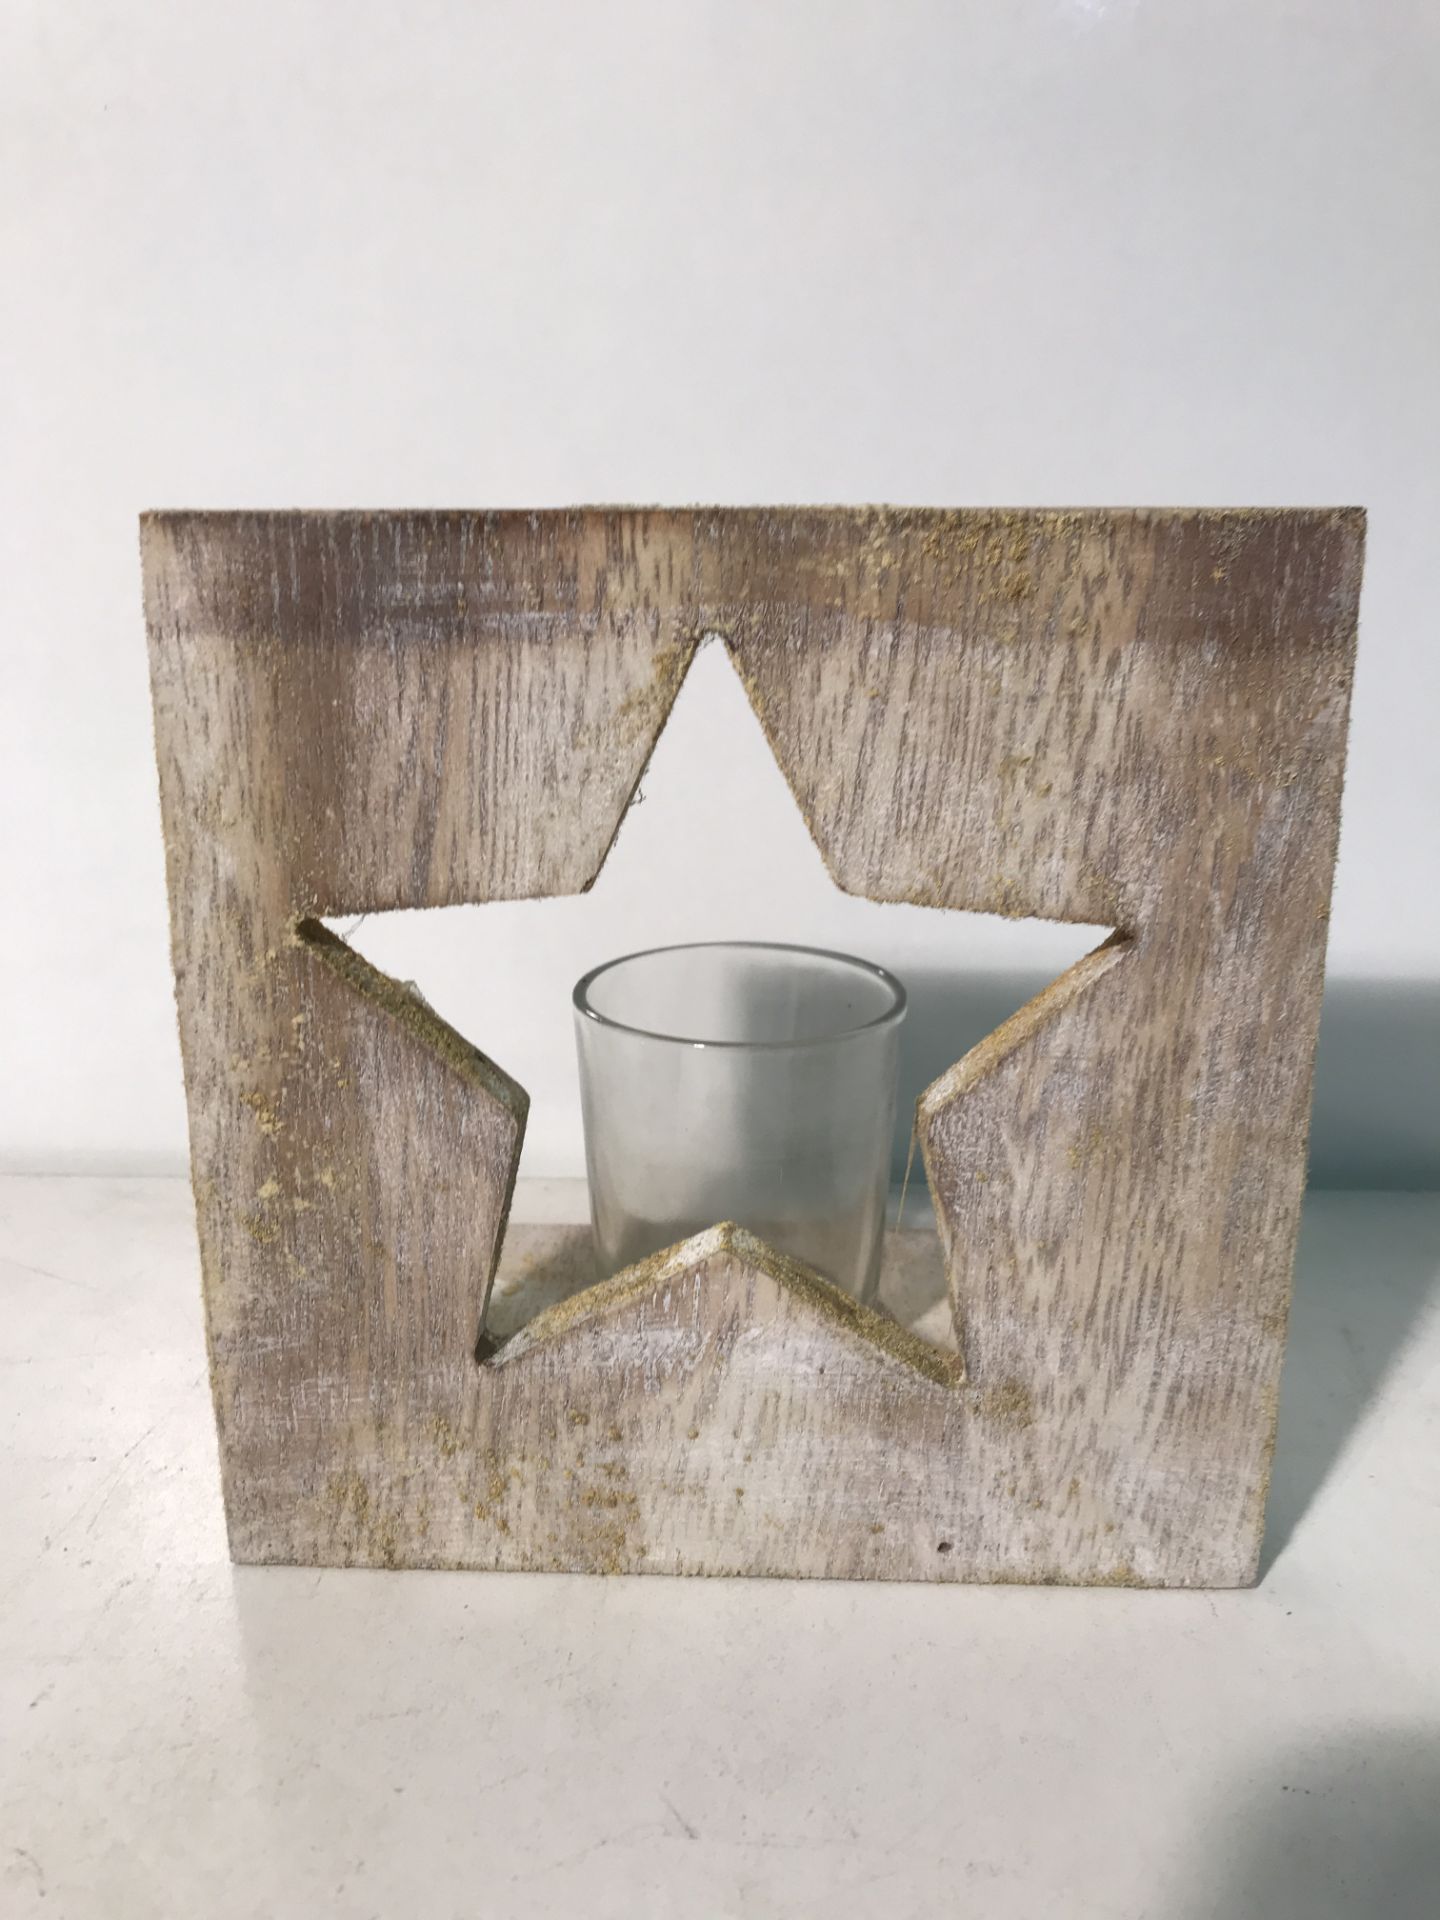 12 x Candle Star Shadow Makers - Image 4 of 4